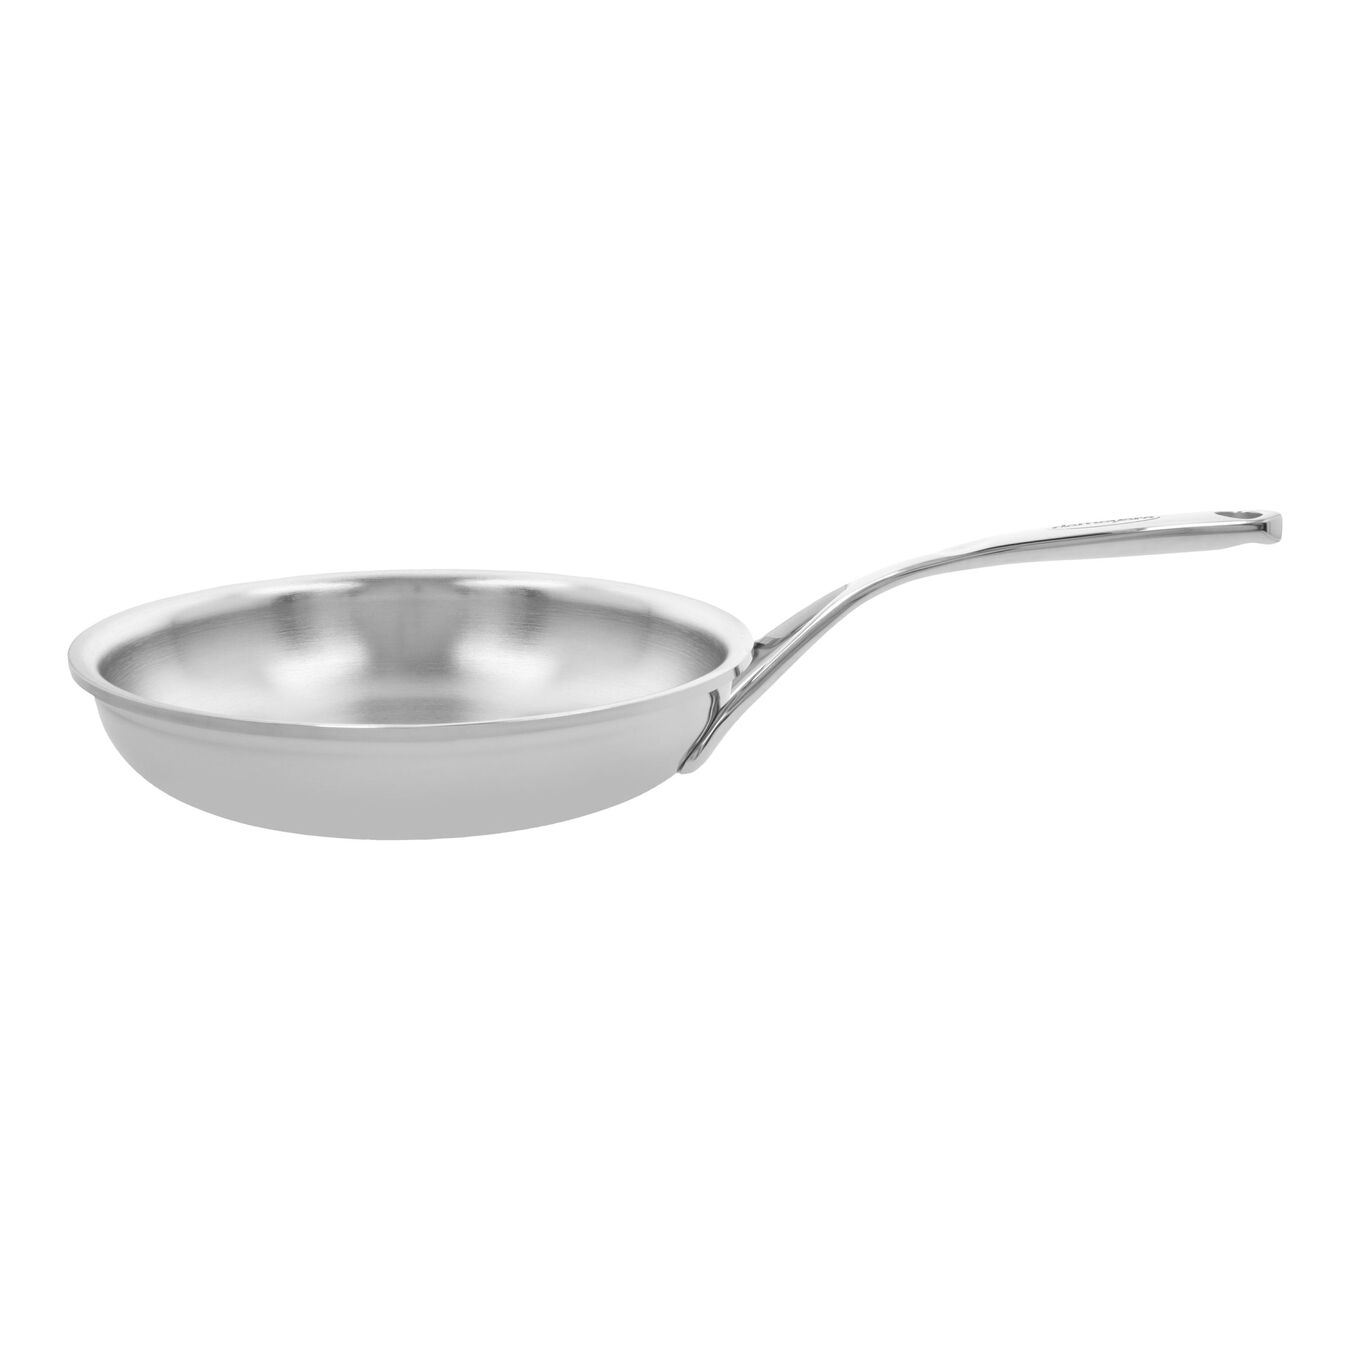 24 cm / 9 inch 18/10 Stainless Steel Frying pan,,large 1